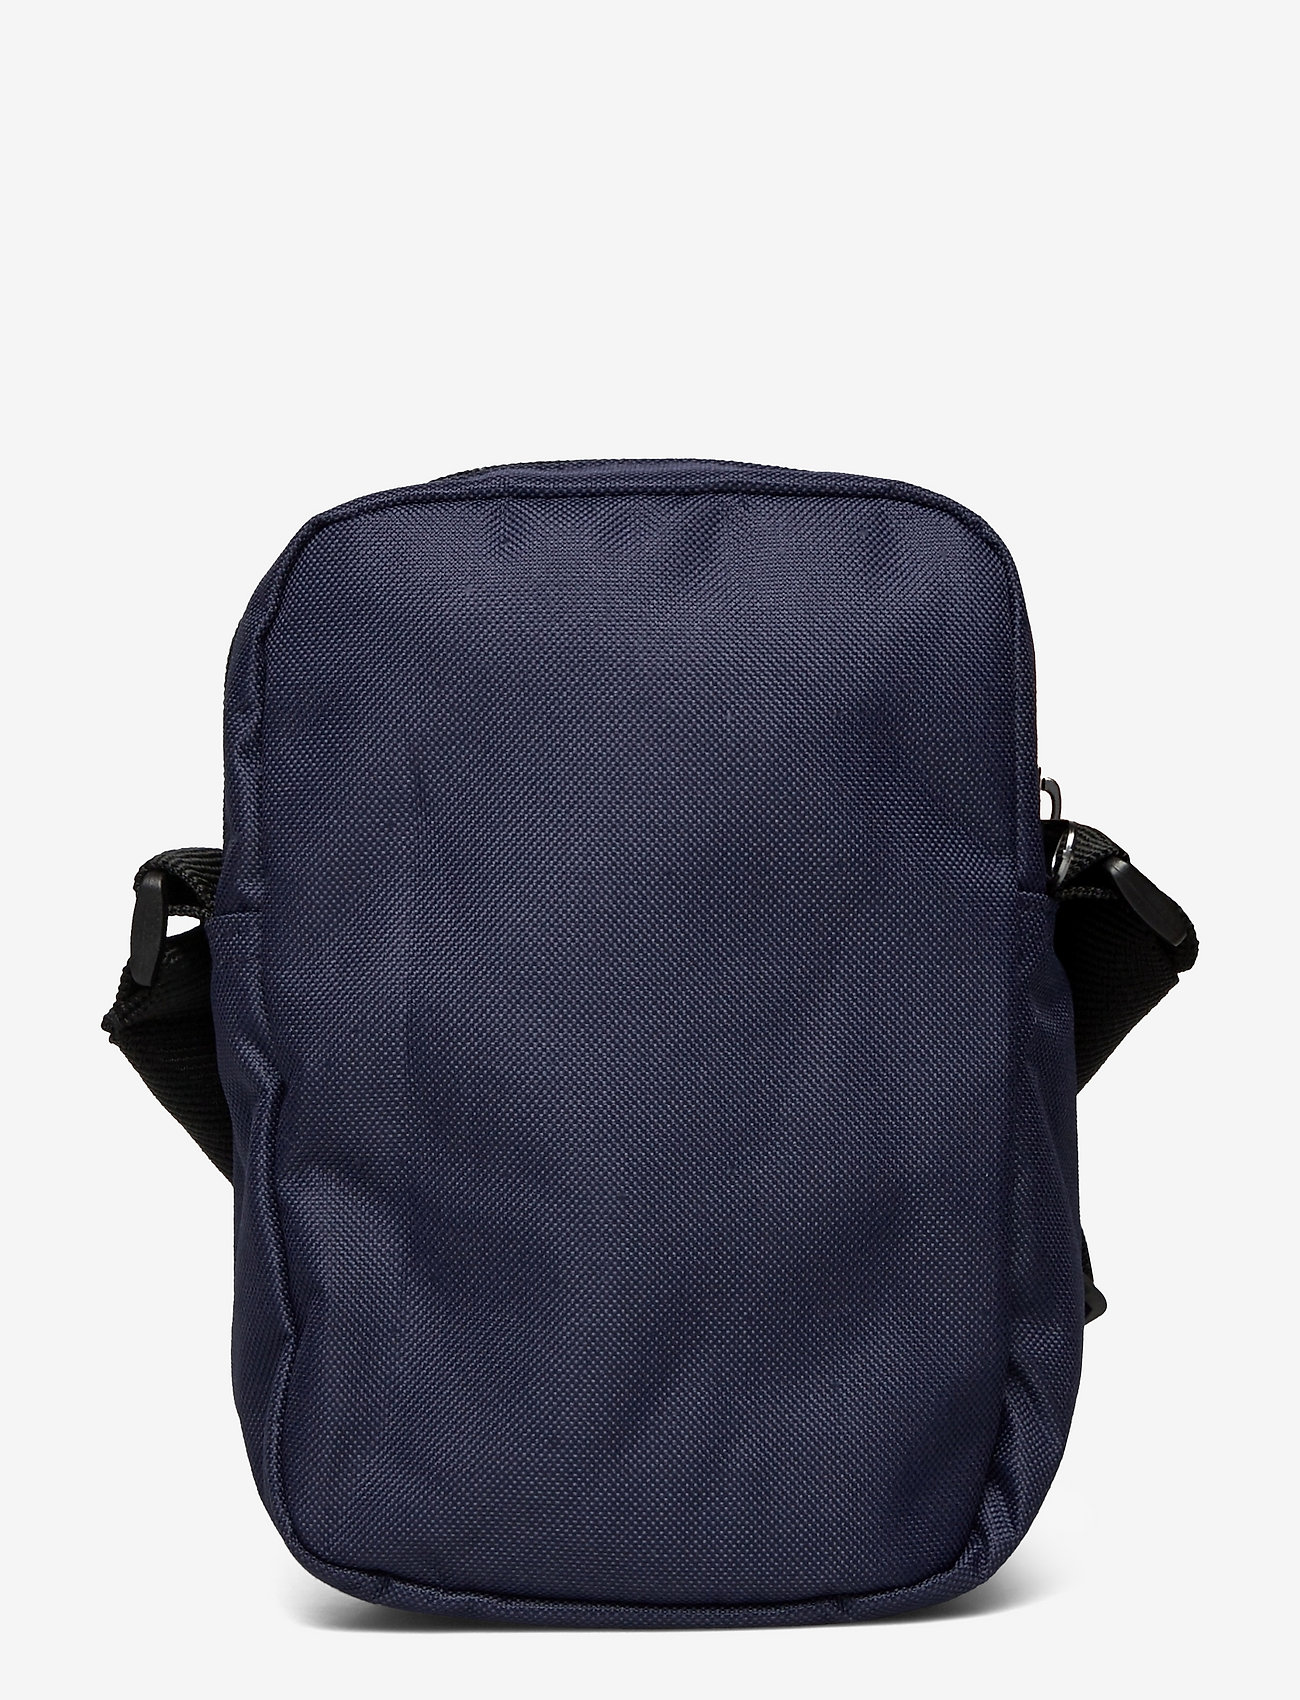 Lyle & Scott - Reporter Bag - lowest prices - navy - 1